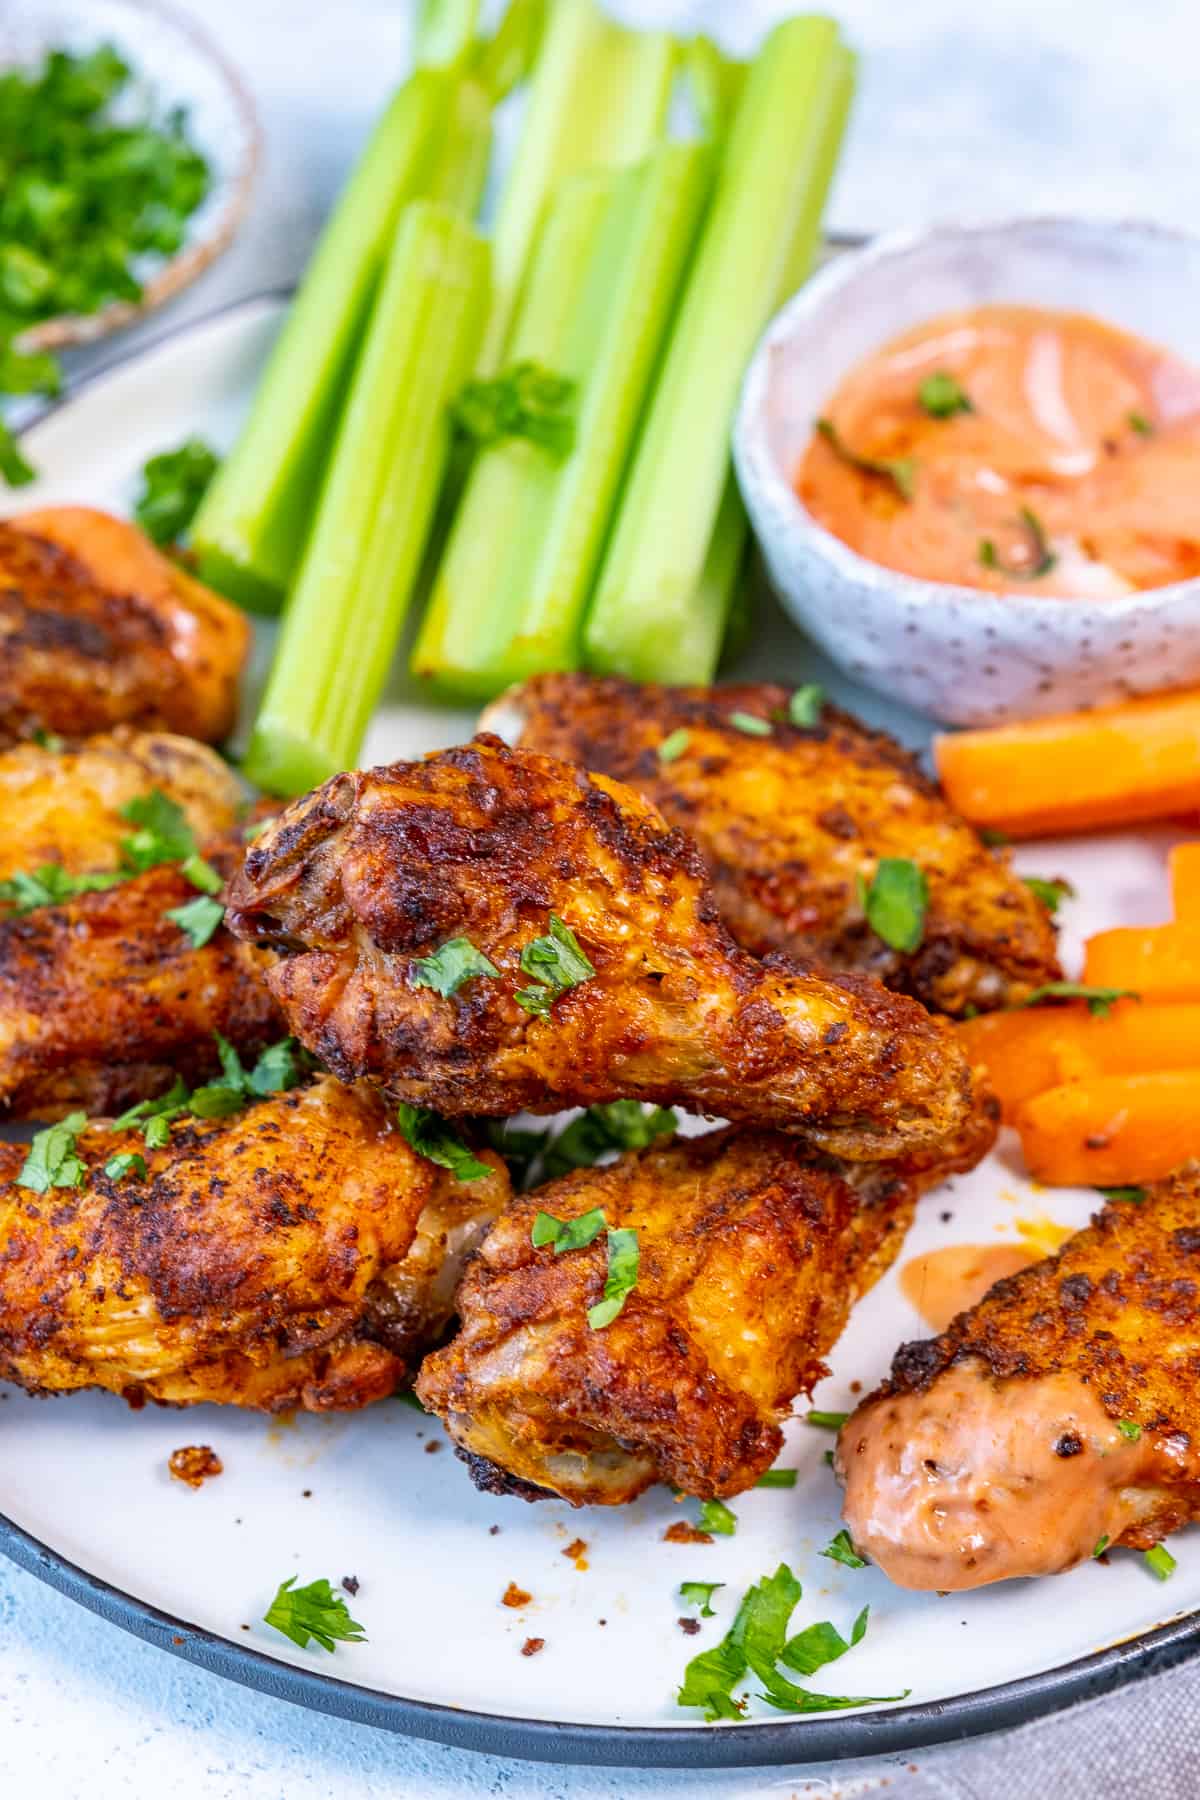 Chicken wings with celery sticks, carrot sticks and a dipping sauce.